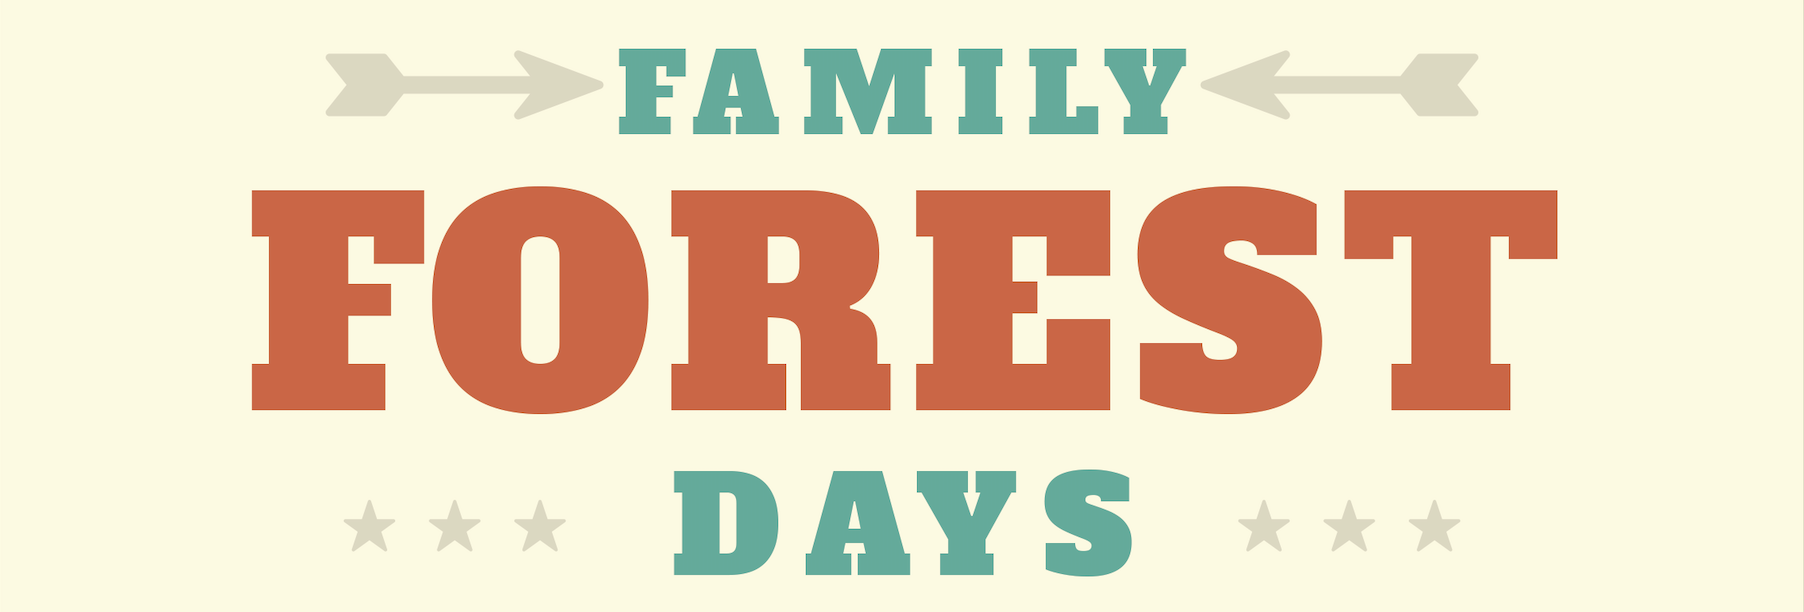 Summer '21 Family Forest Days!